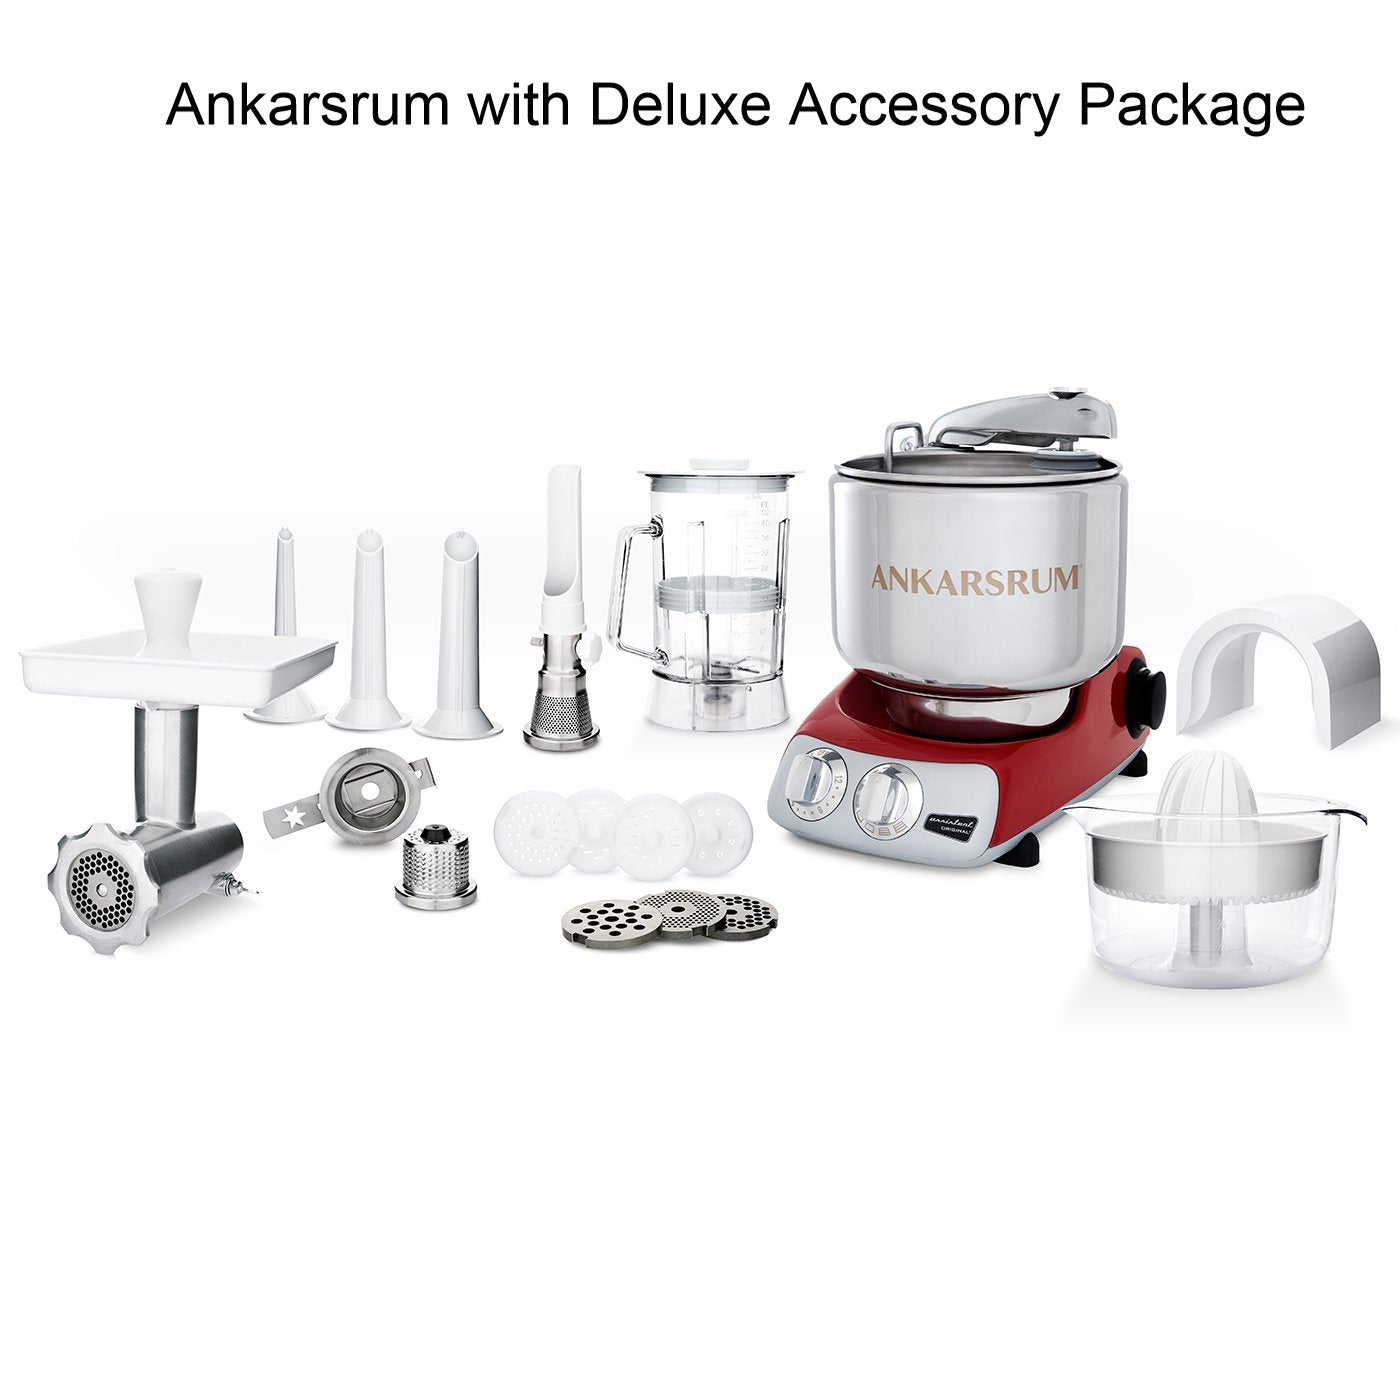 DeLuxe Package - Ankarsrum United States